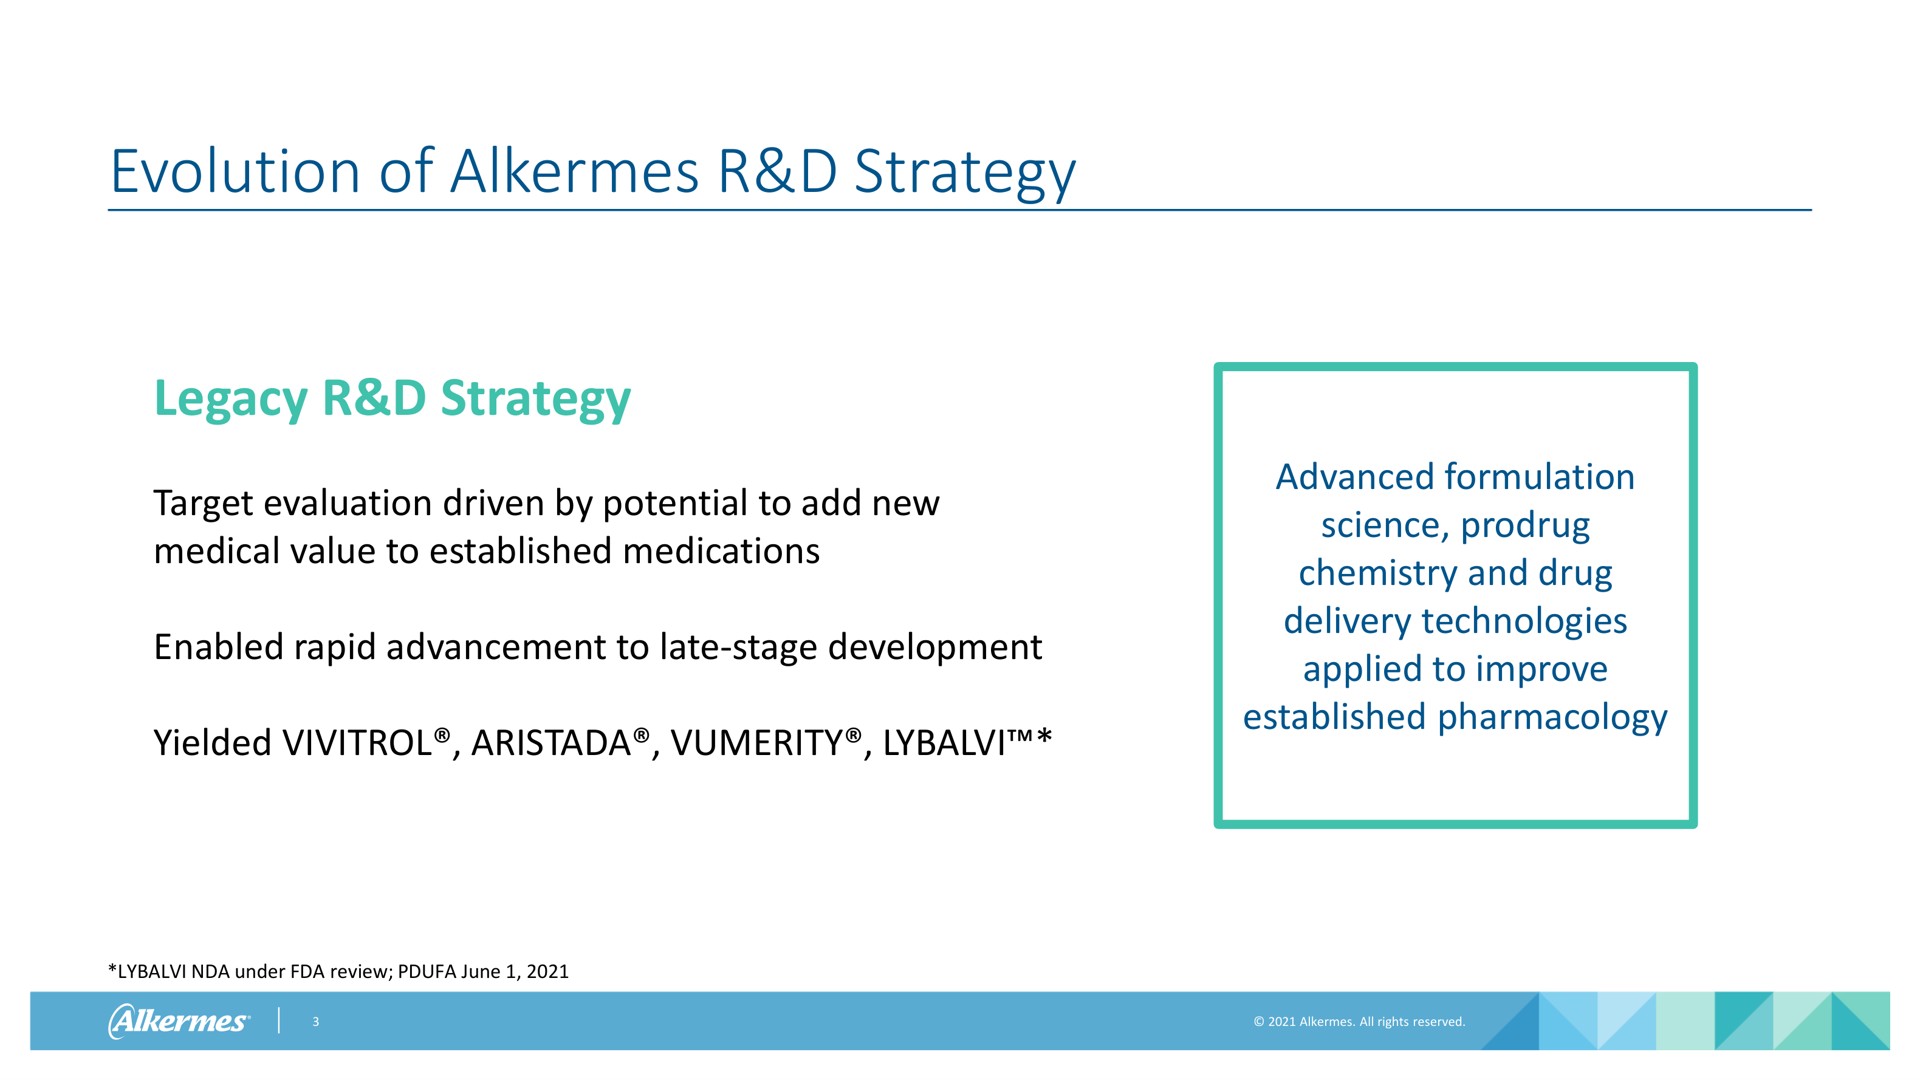 evolution of alkermes strategy legacy strategy target evaluation driven by potential to add new medical value to established medications enabled rapid advancement to late stage development yielded advanced formulation science chemistry and drug delivery technologies applied to improve established pharmacology under review june | Alkermes